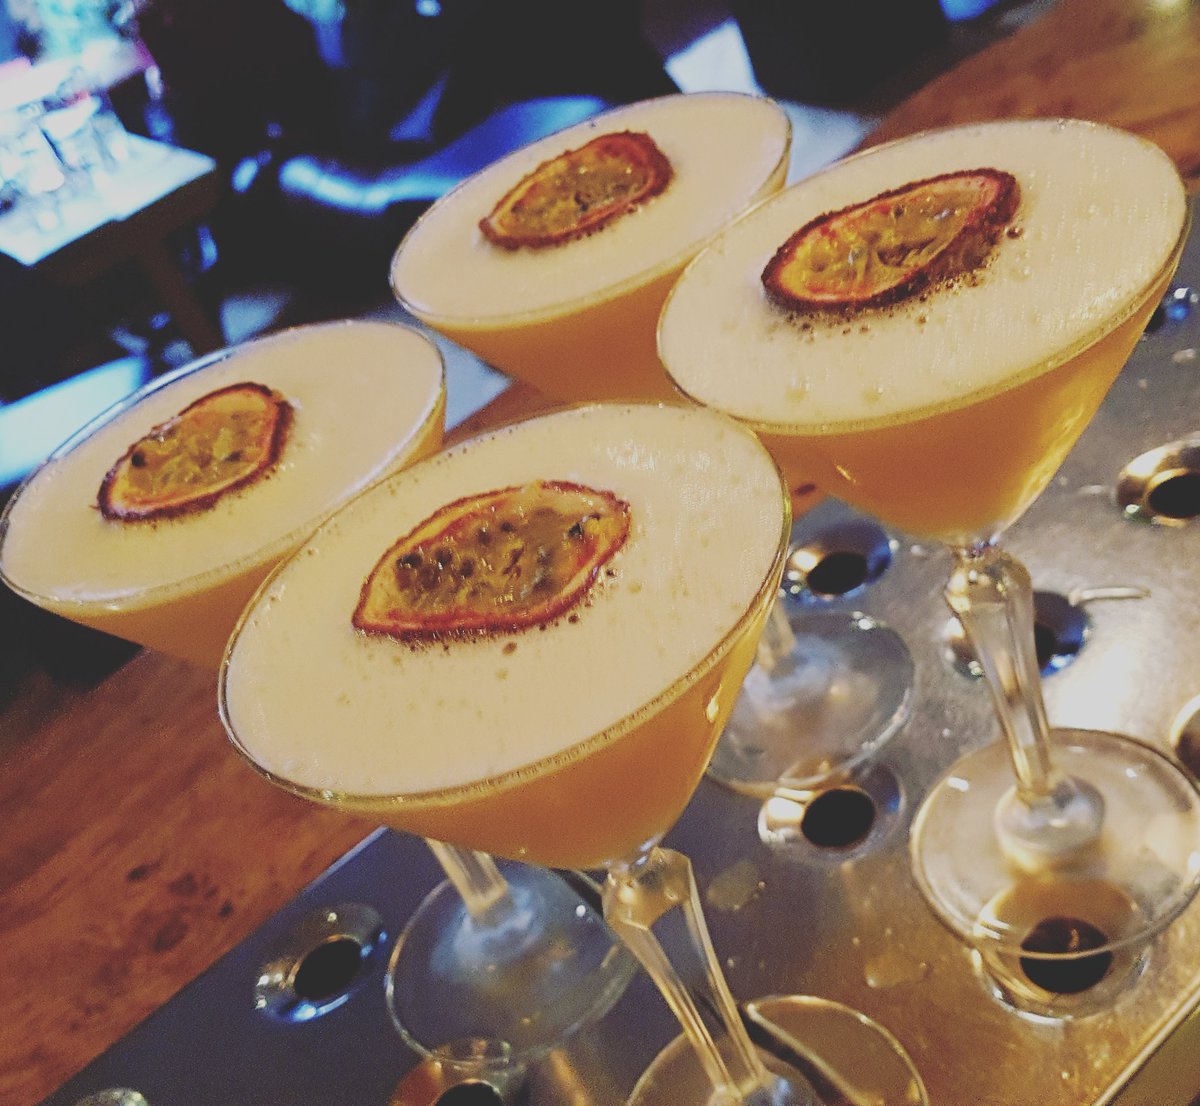 It's Friday! That can only mean one thing... pornstar martinis! 
#vodka #passionfruit #pornstarmartini #vanilla #delicious #yum #friyay #fridaynightsesh #fridayfeels #party